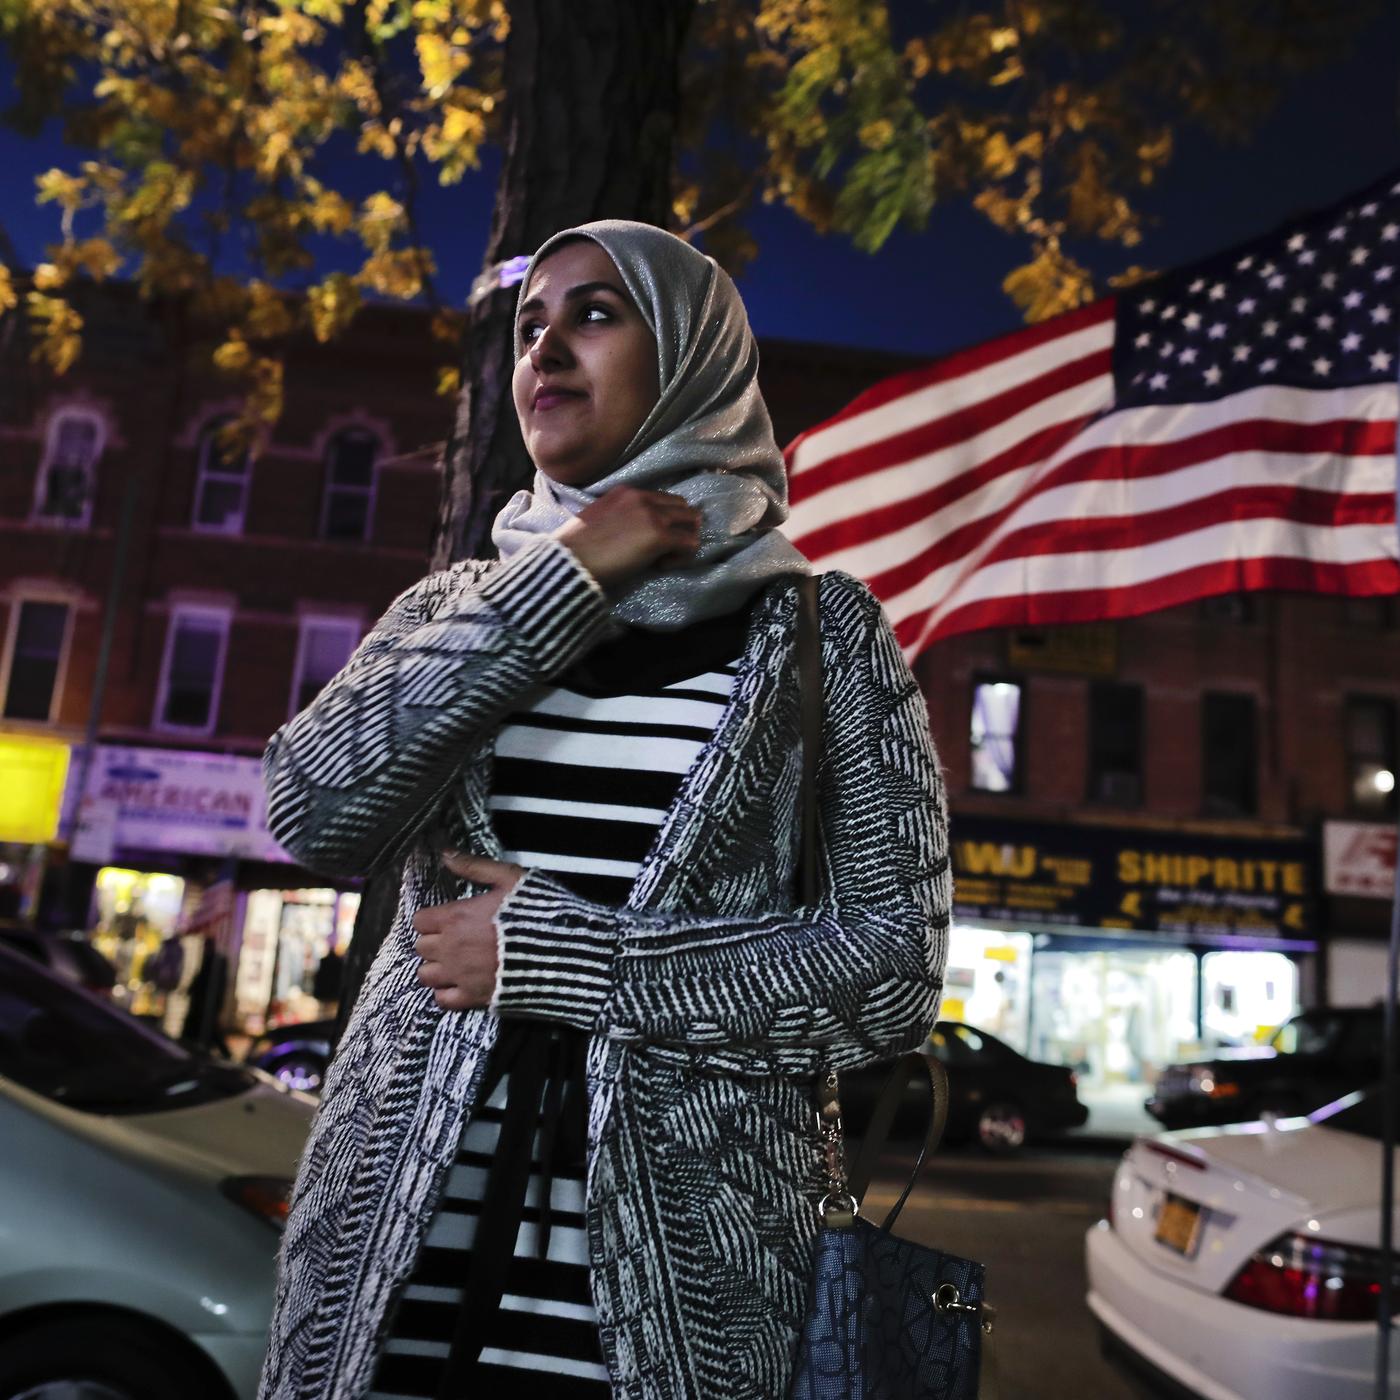 The History of Arab-American Immigration